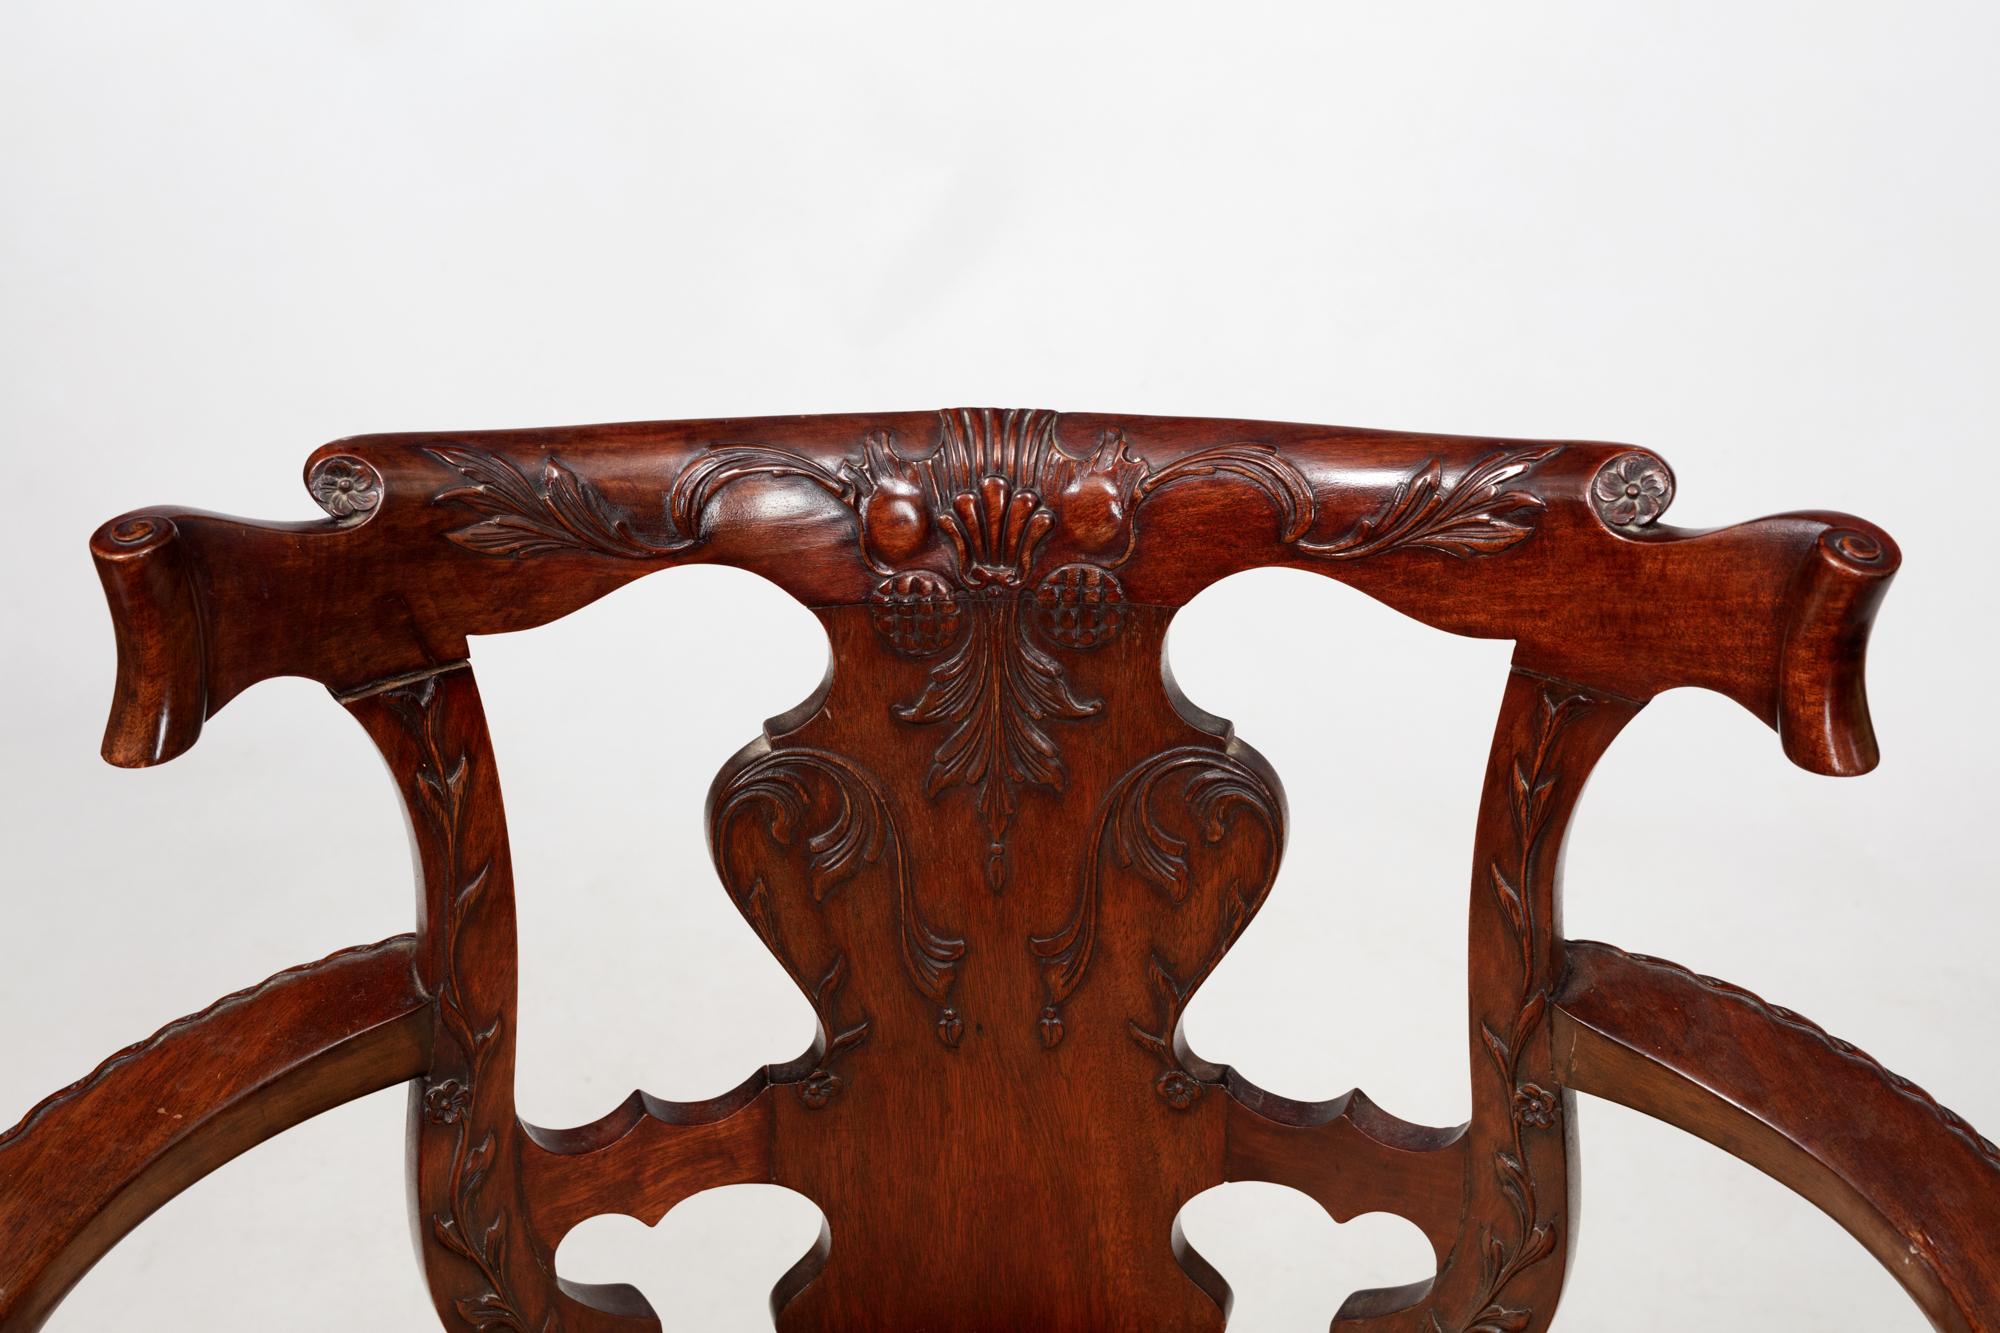 19th Century Irish Mahogany Open Armchair. This desk chair in the Georgian style with a solid carved splat and top rail, outswept arms, oval seat, with scallop scroll seat rail, sitting on carved cabriole legs with shells, and terminating on ball